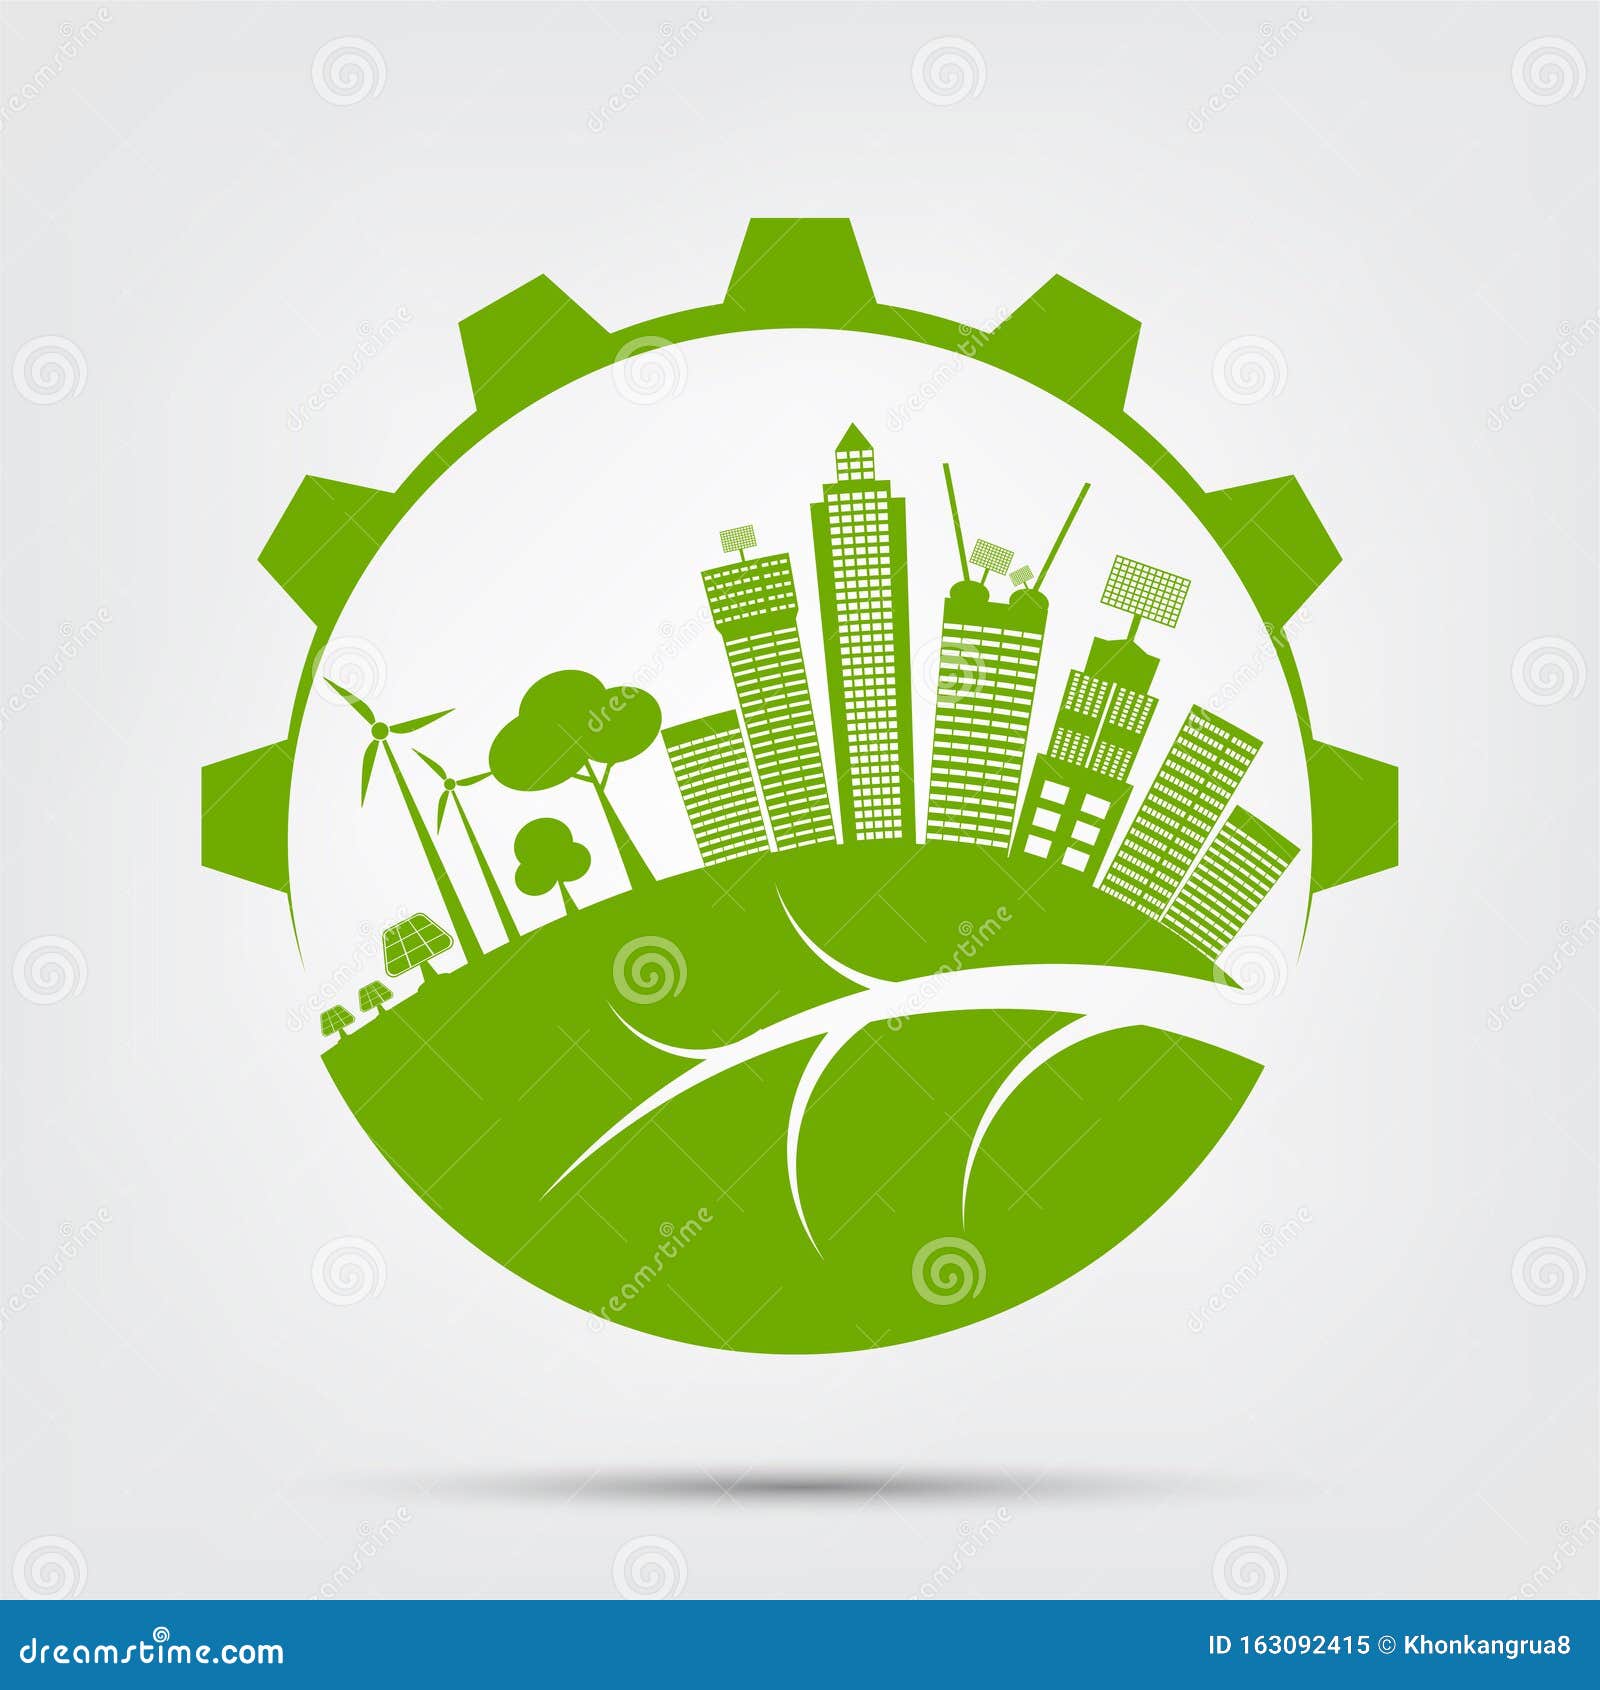 ecology town concept and environment with eco-friendly ideas, 